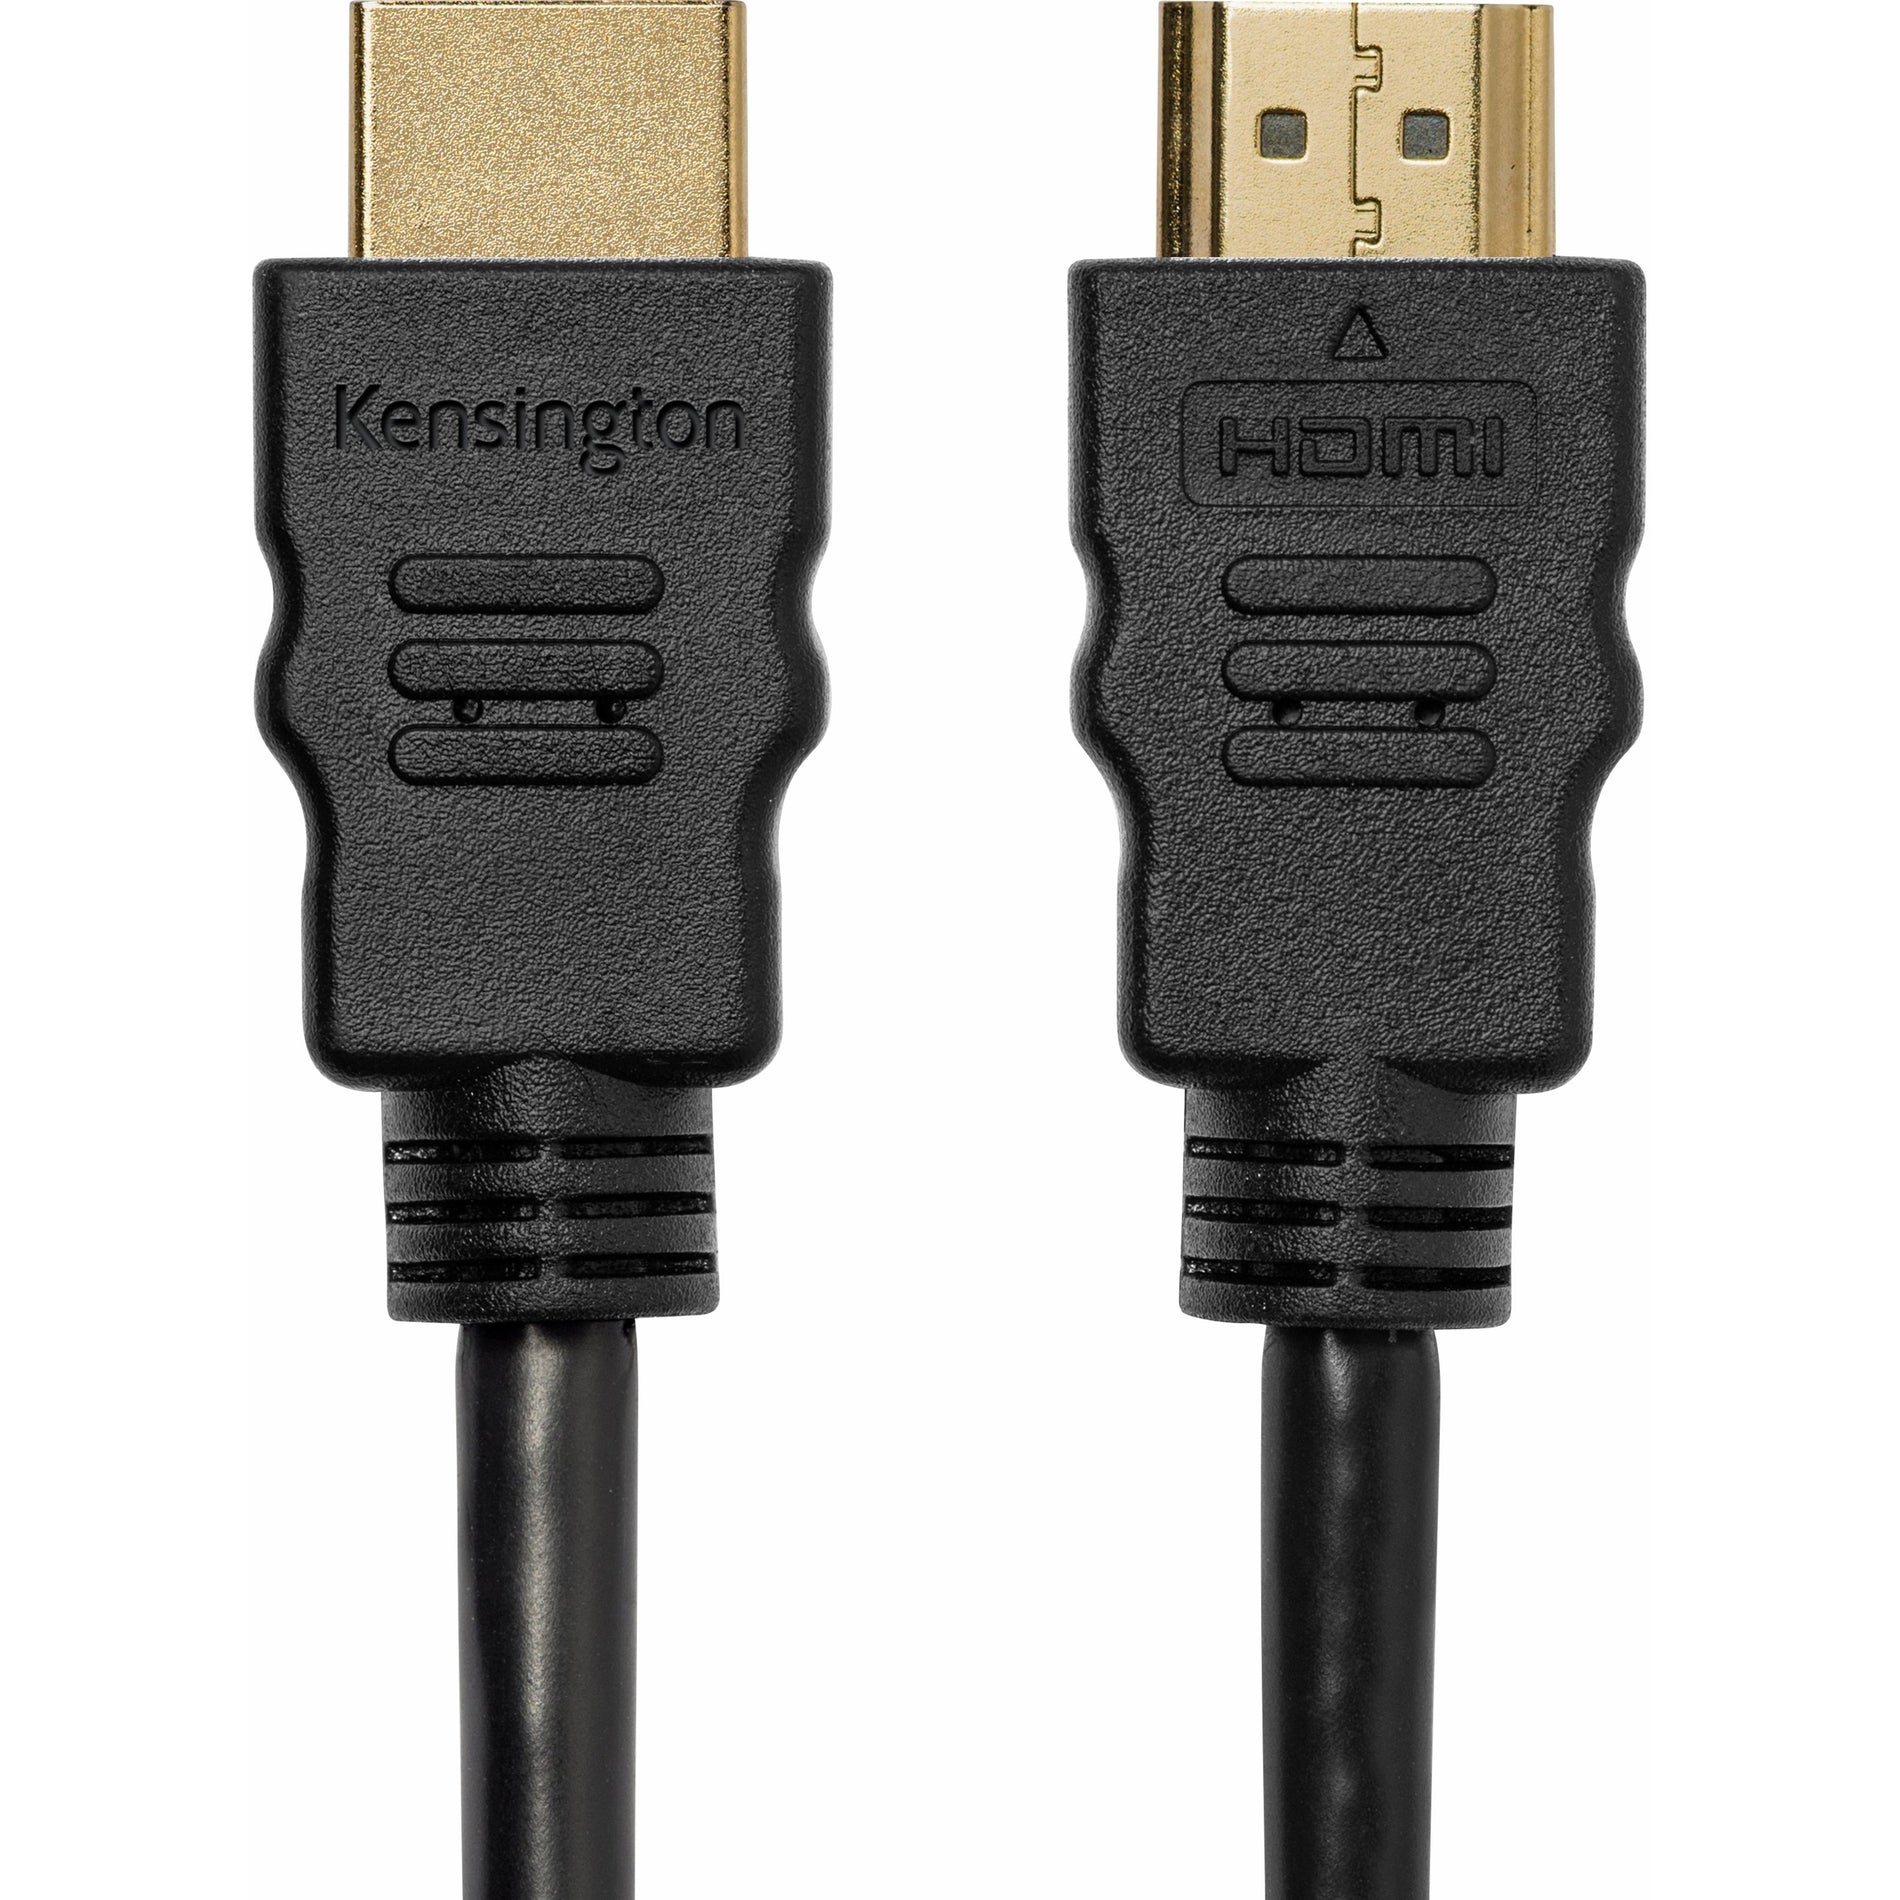 Kensington K33020WW High Speed HDMI Cable With Ethernet, 6ft, 18 Gbit/s, 4K Resolution